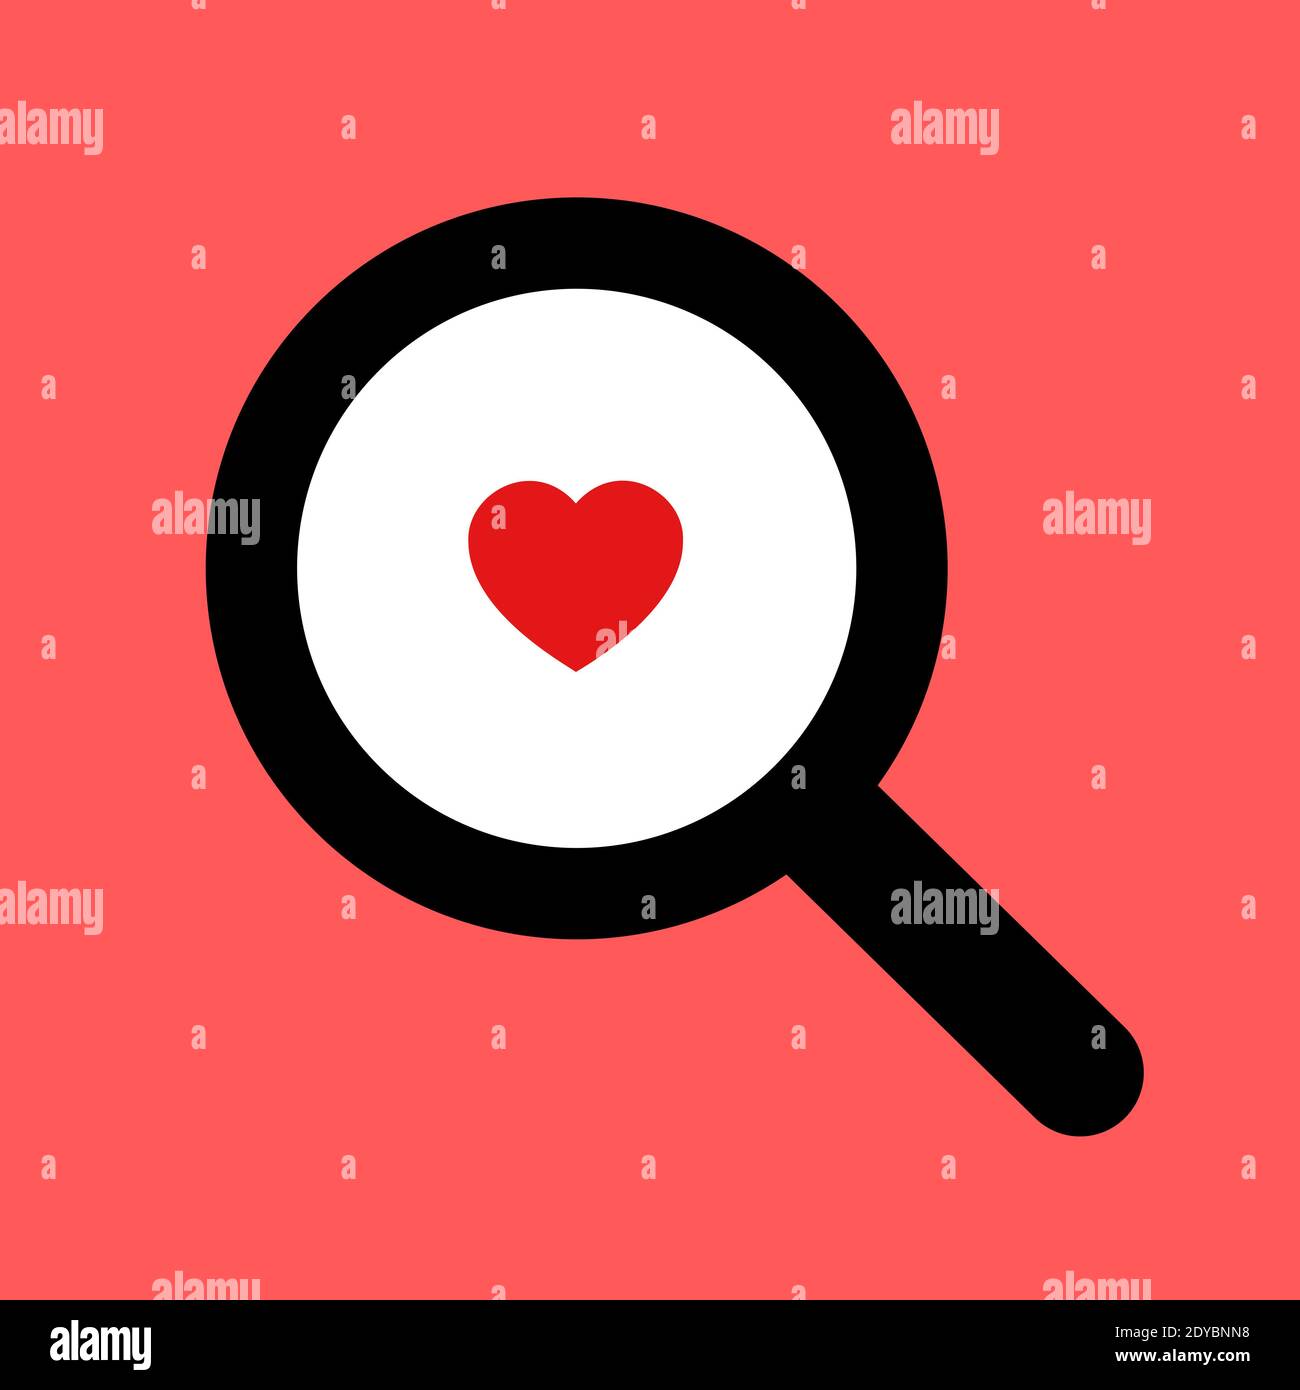 Magnifying glass and red heart as metaphor of searching and finding of love. Seeking for romantic partner and significant other through dating agency Stock Photo